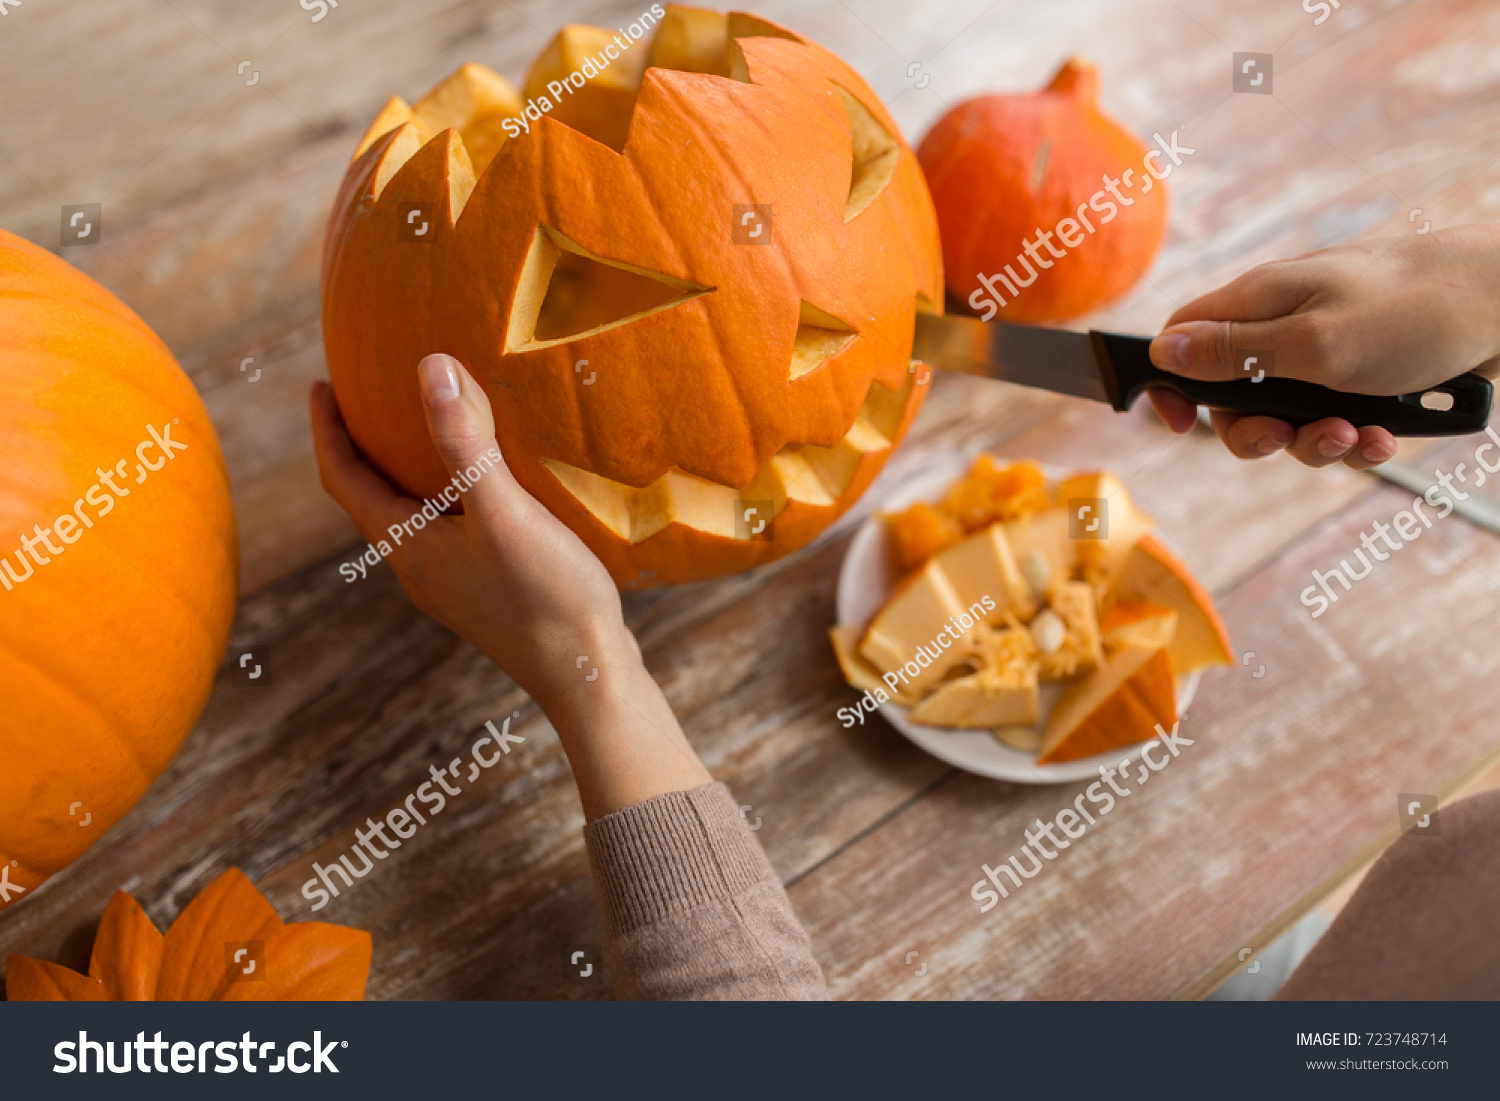 halloween, decoration and holidays concept - close up of woman with knife carving pumpkin or jack-o-lantern at home #723748714